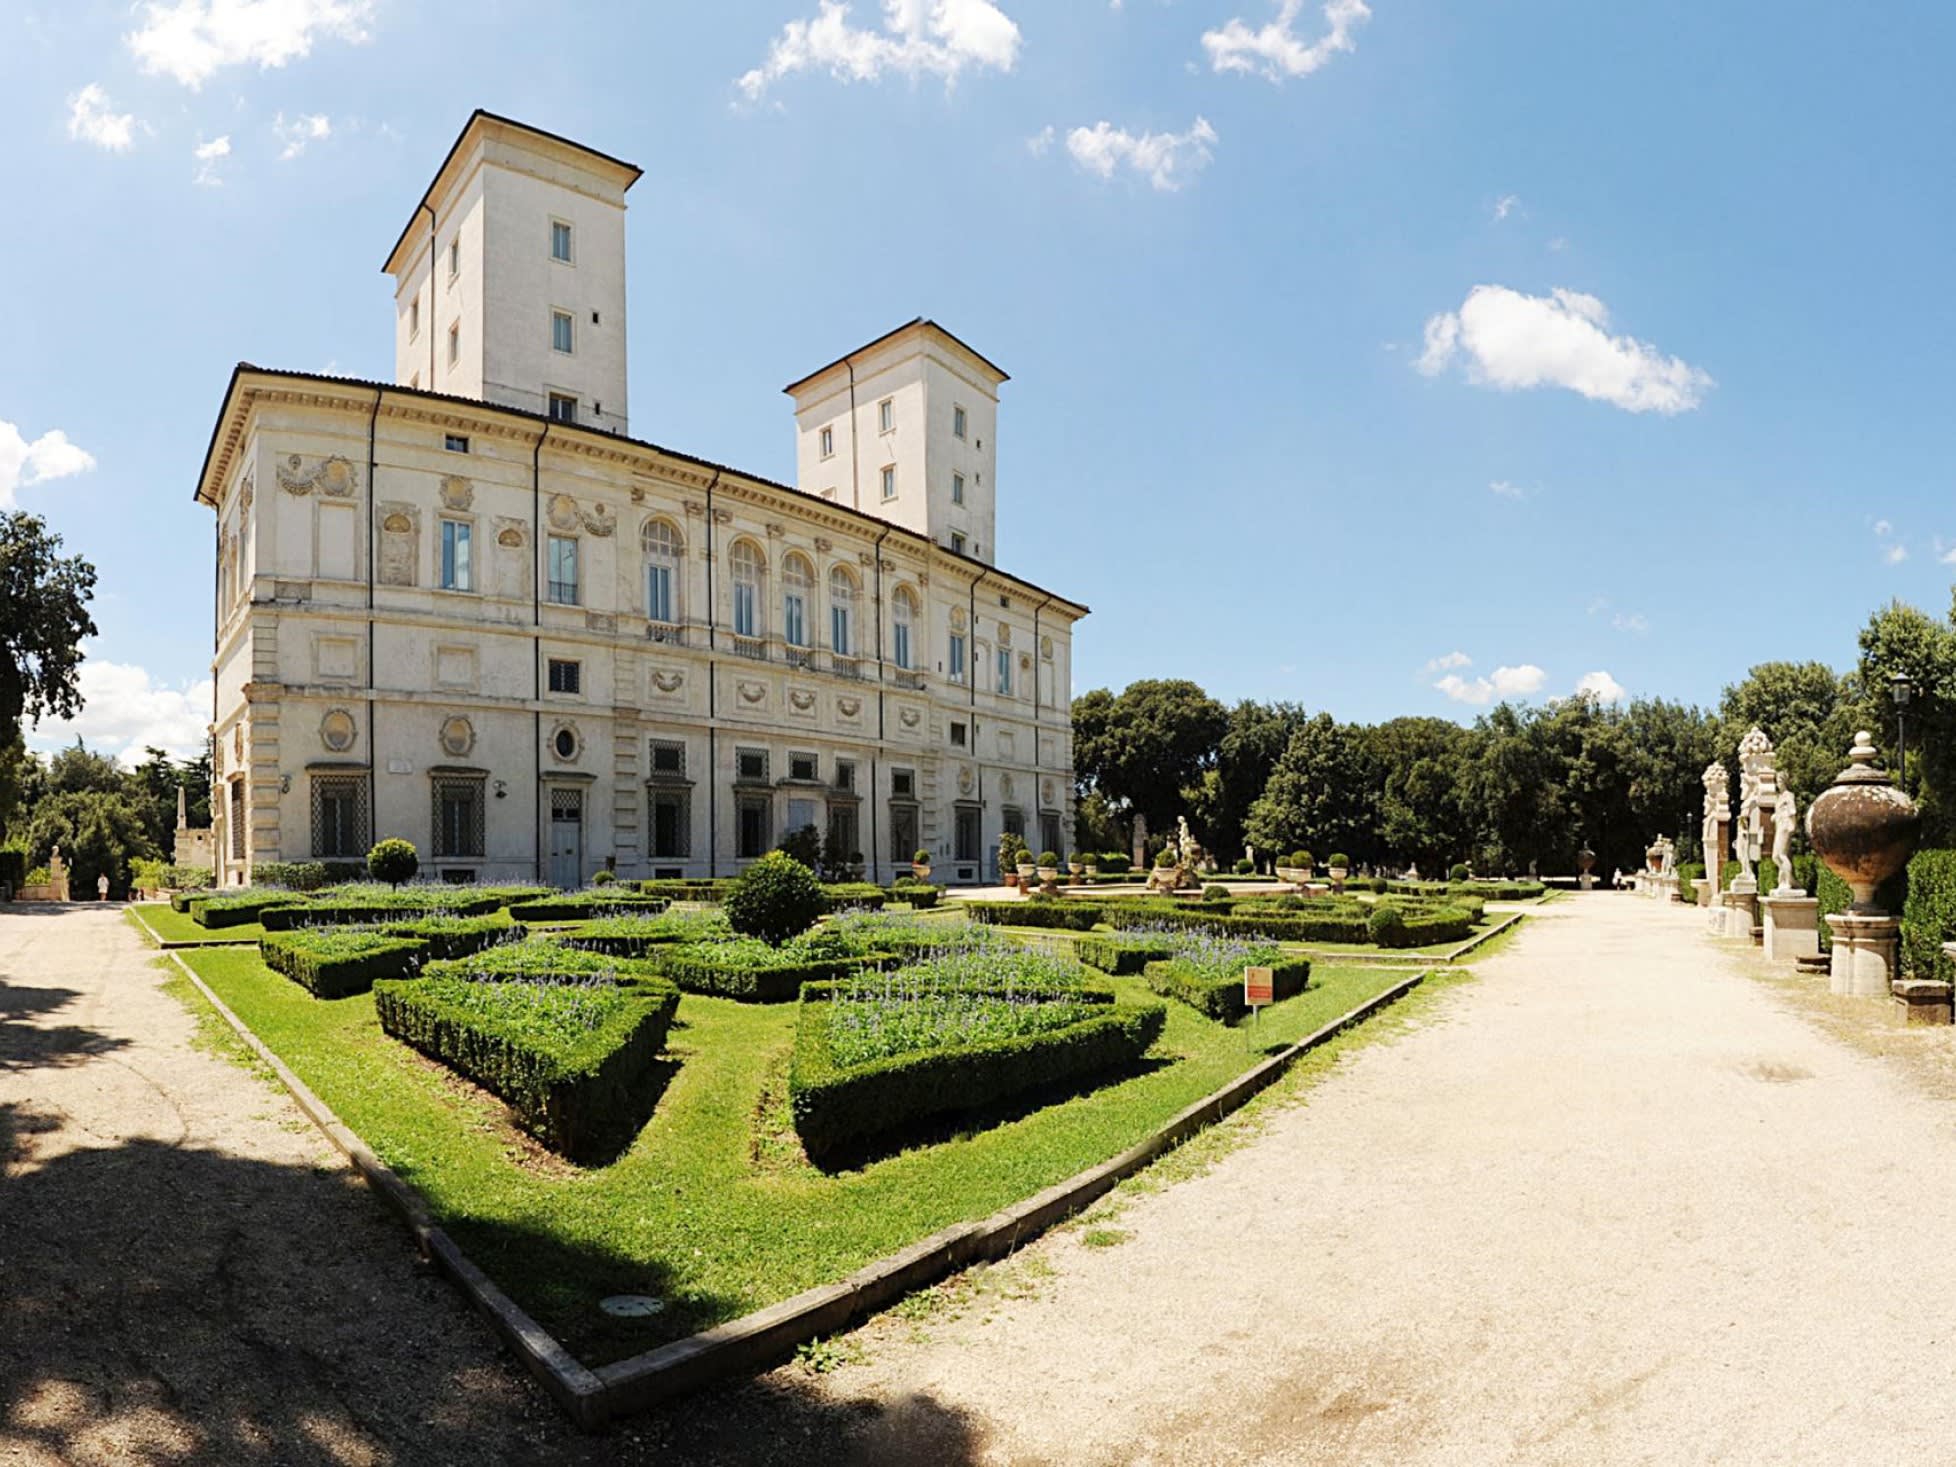 Guided Tour of Galleria Borghese